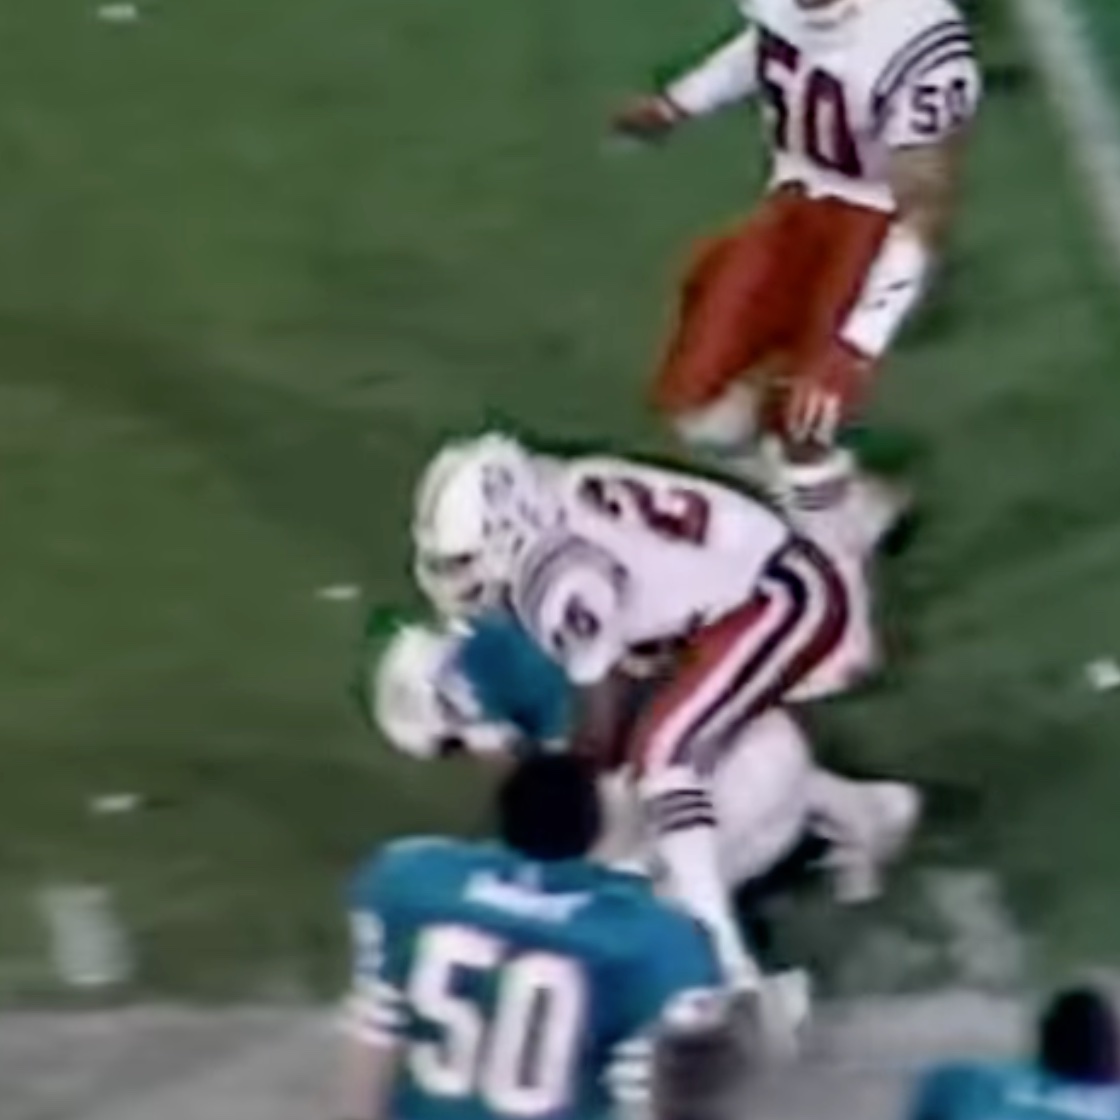 Dec. 22, 1986: The Dolphins lose their final game at Miami's Orange Bowl, missing the playoffs for the first time since 1980. The game wasn't even televised in So. Florida; it didn't sell out in time for the NFL's blackout rule. 📼youtube.com/watch?v=JROVXO… #Miami #Dolphins